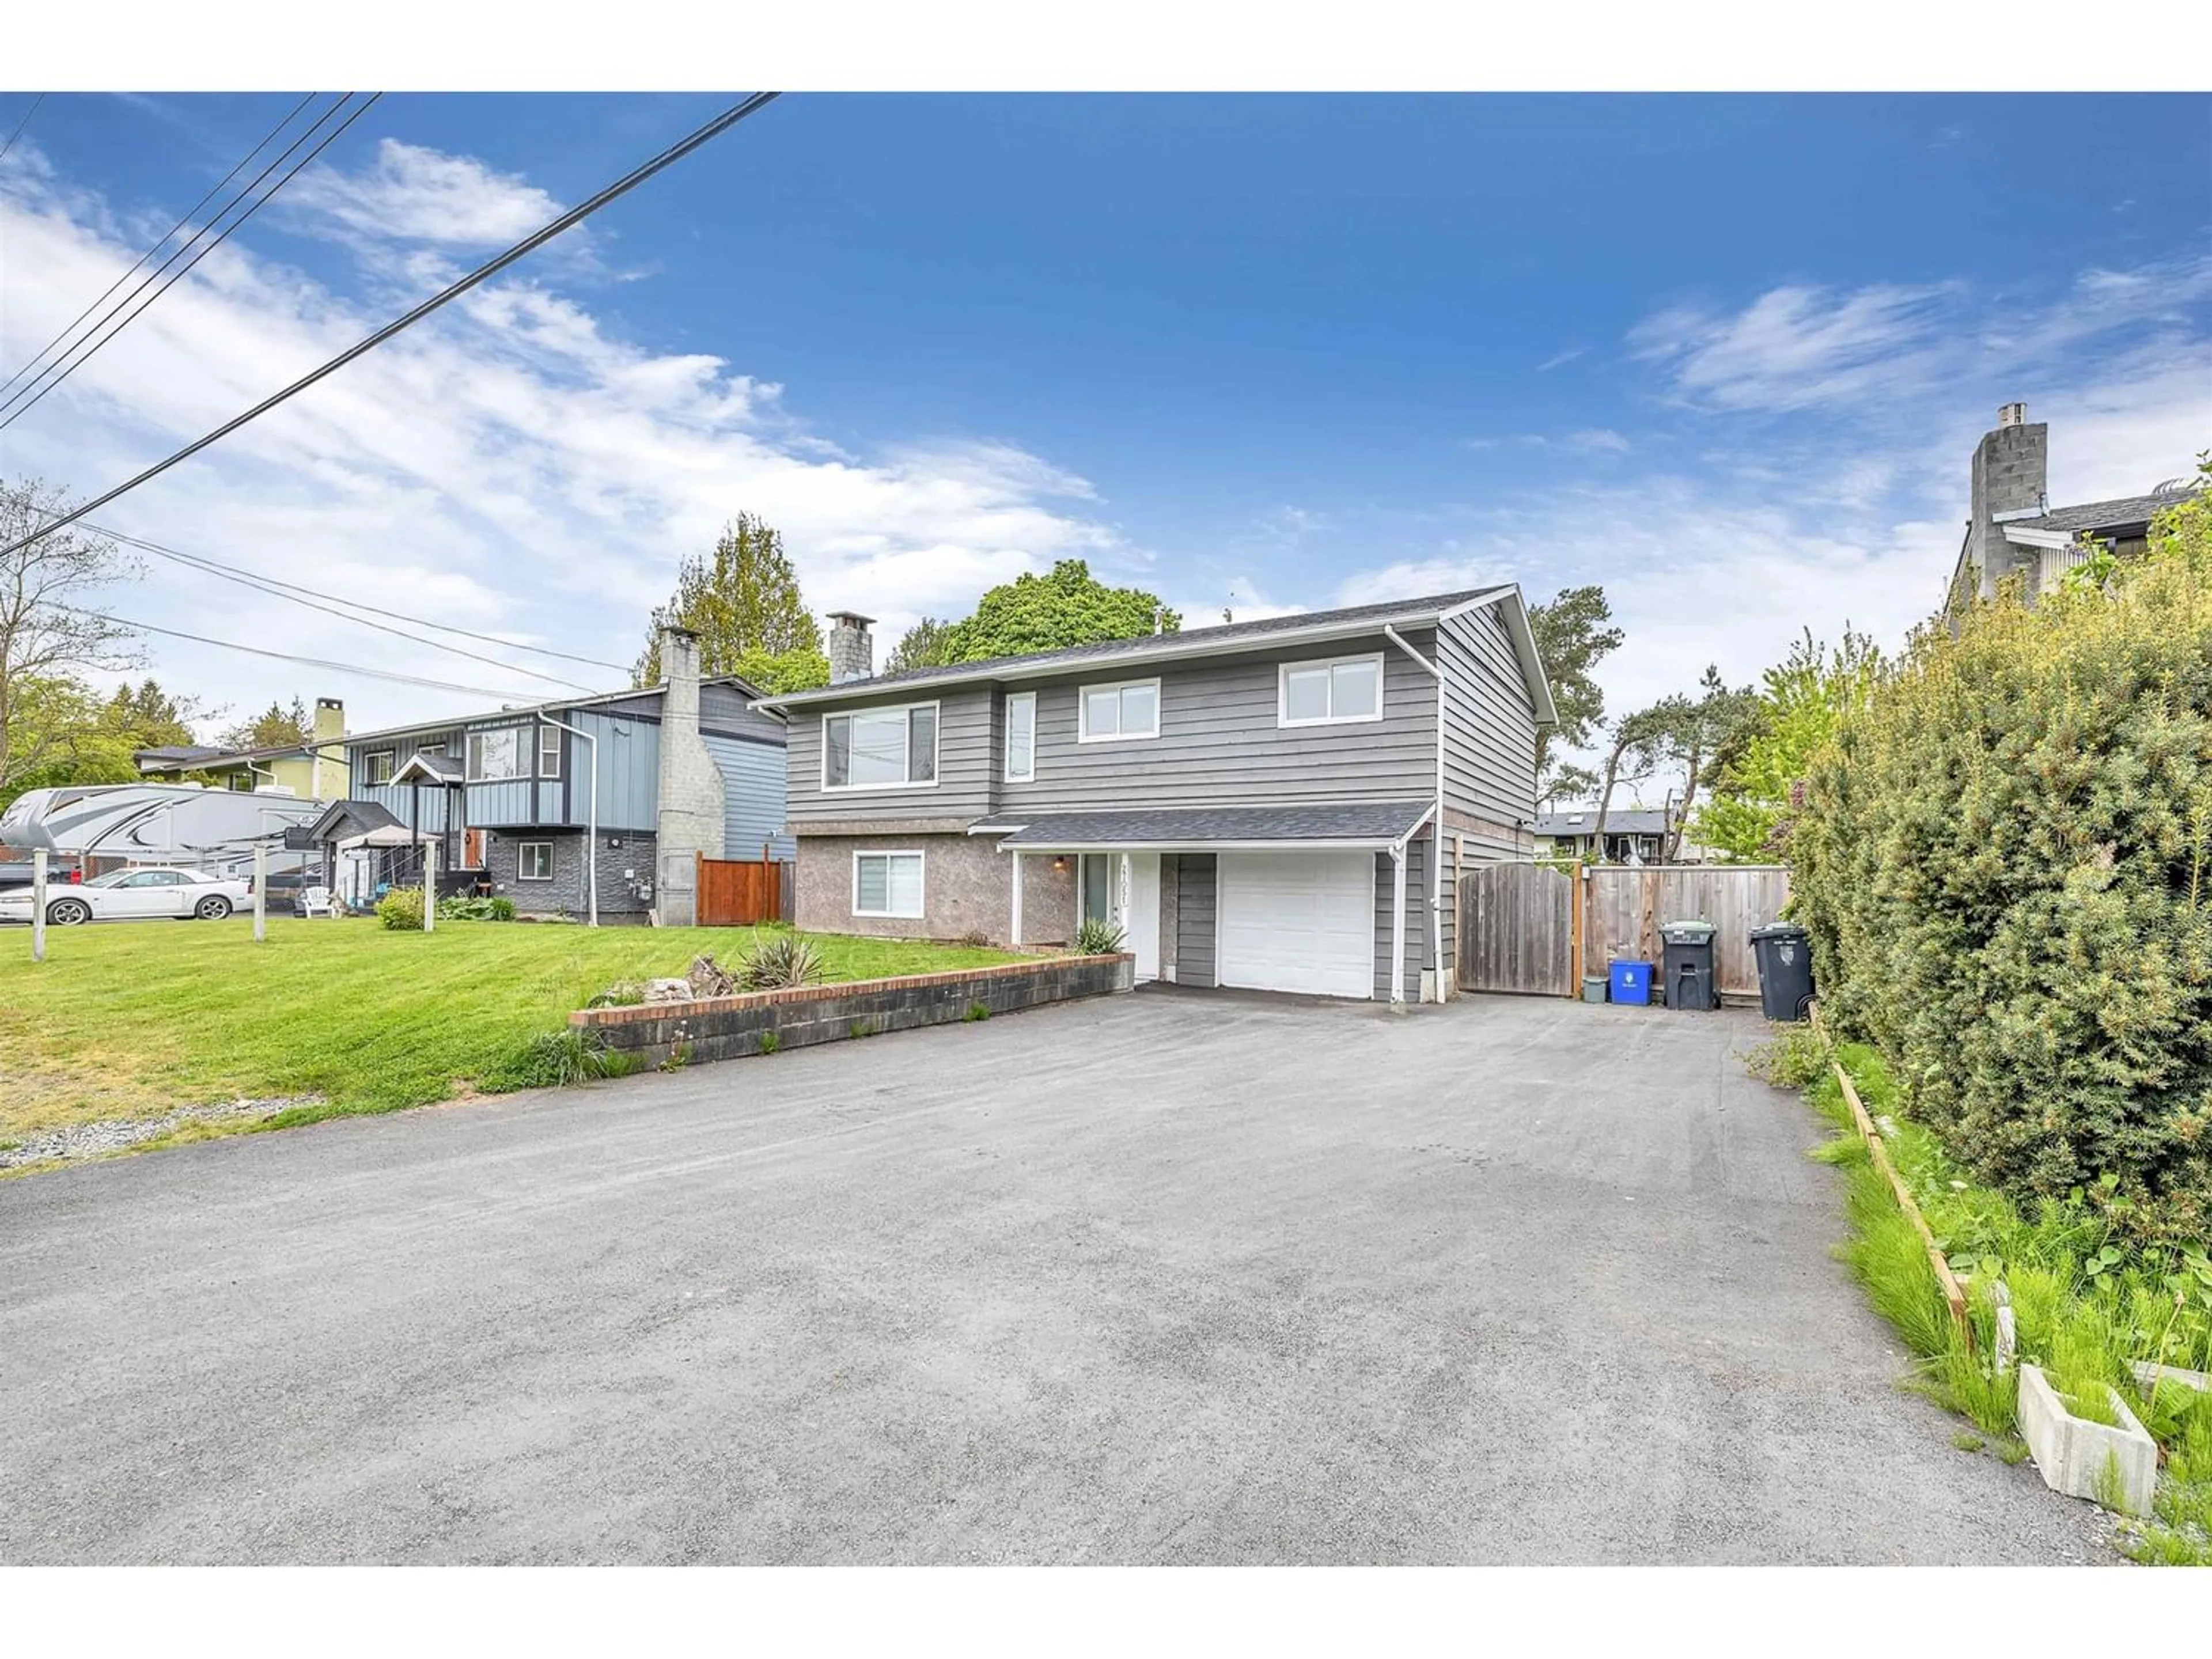 Frontside or backside of a home for 27051 28 AVENUE, Langley British Columbia V4W3A3